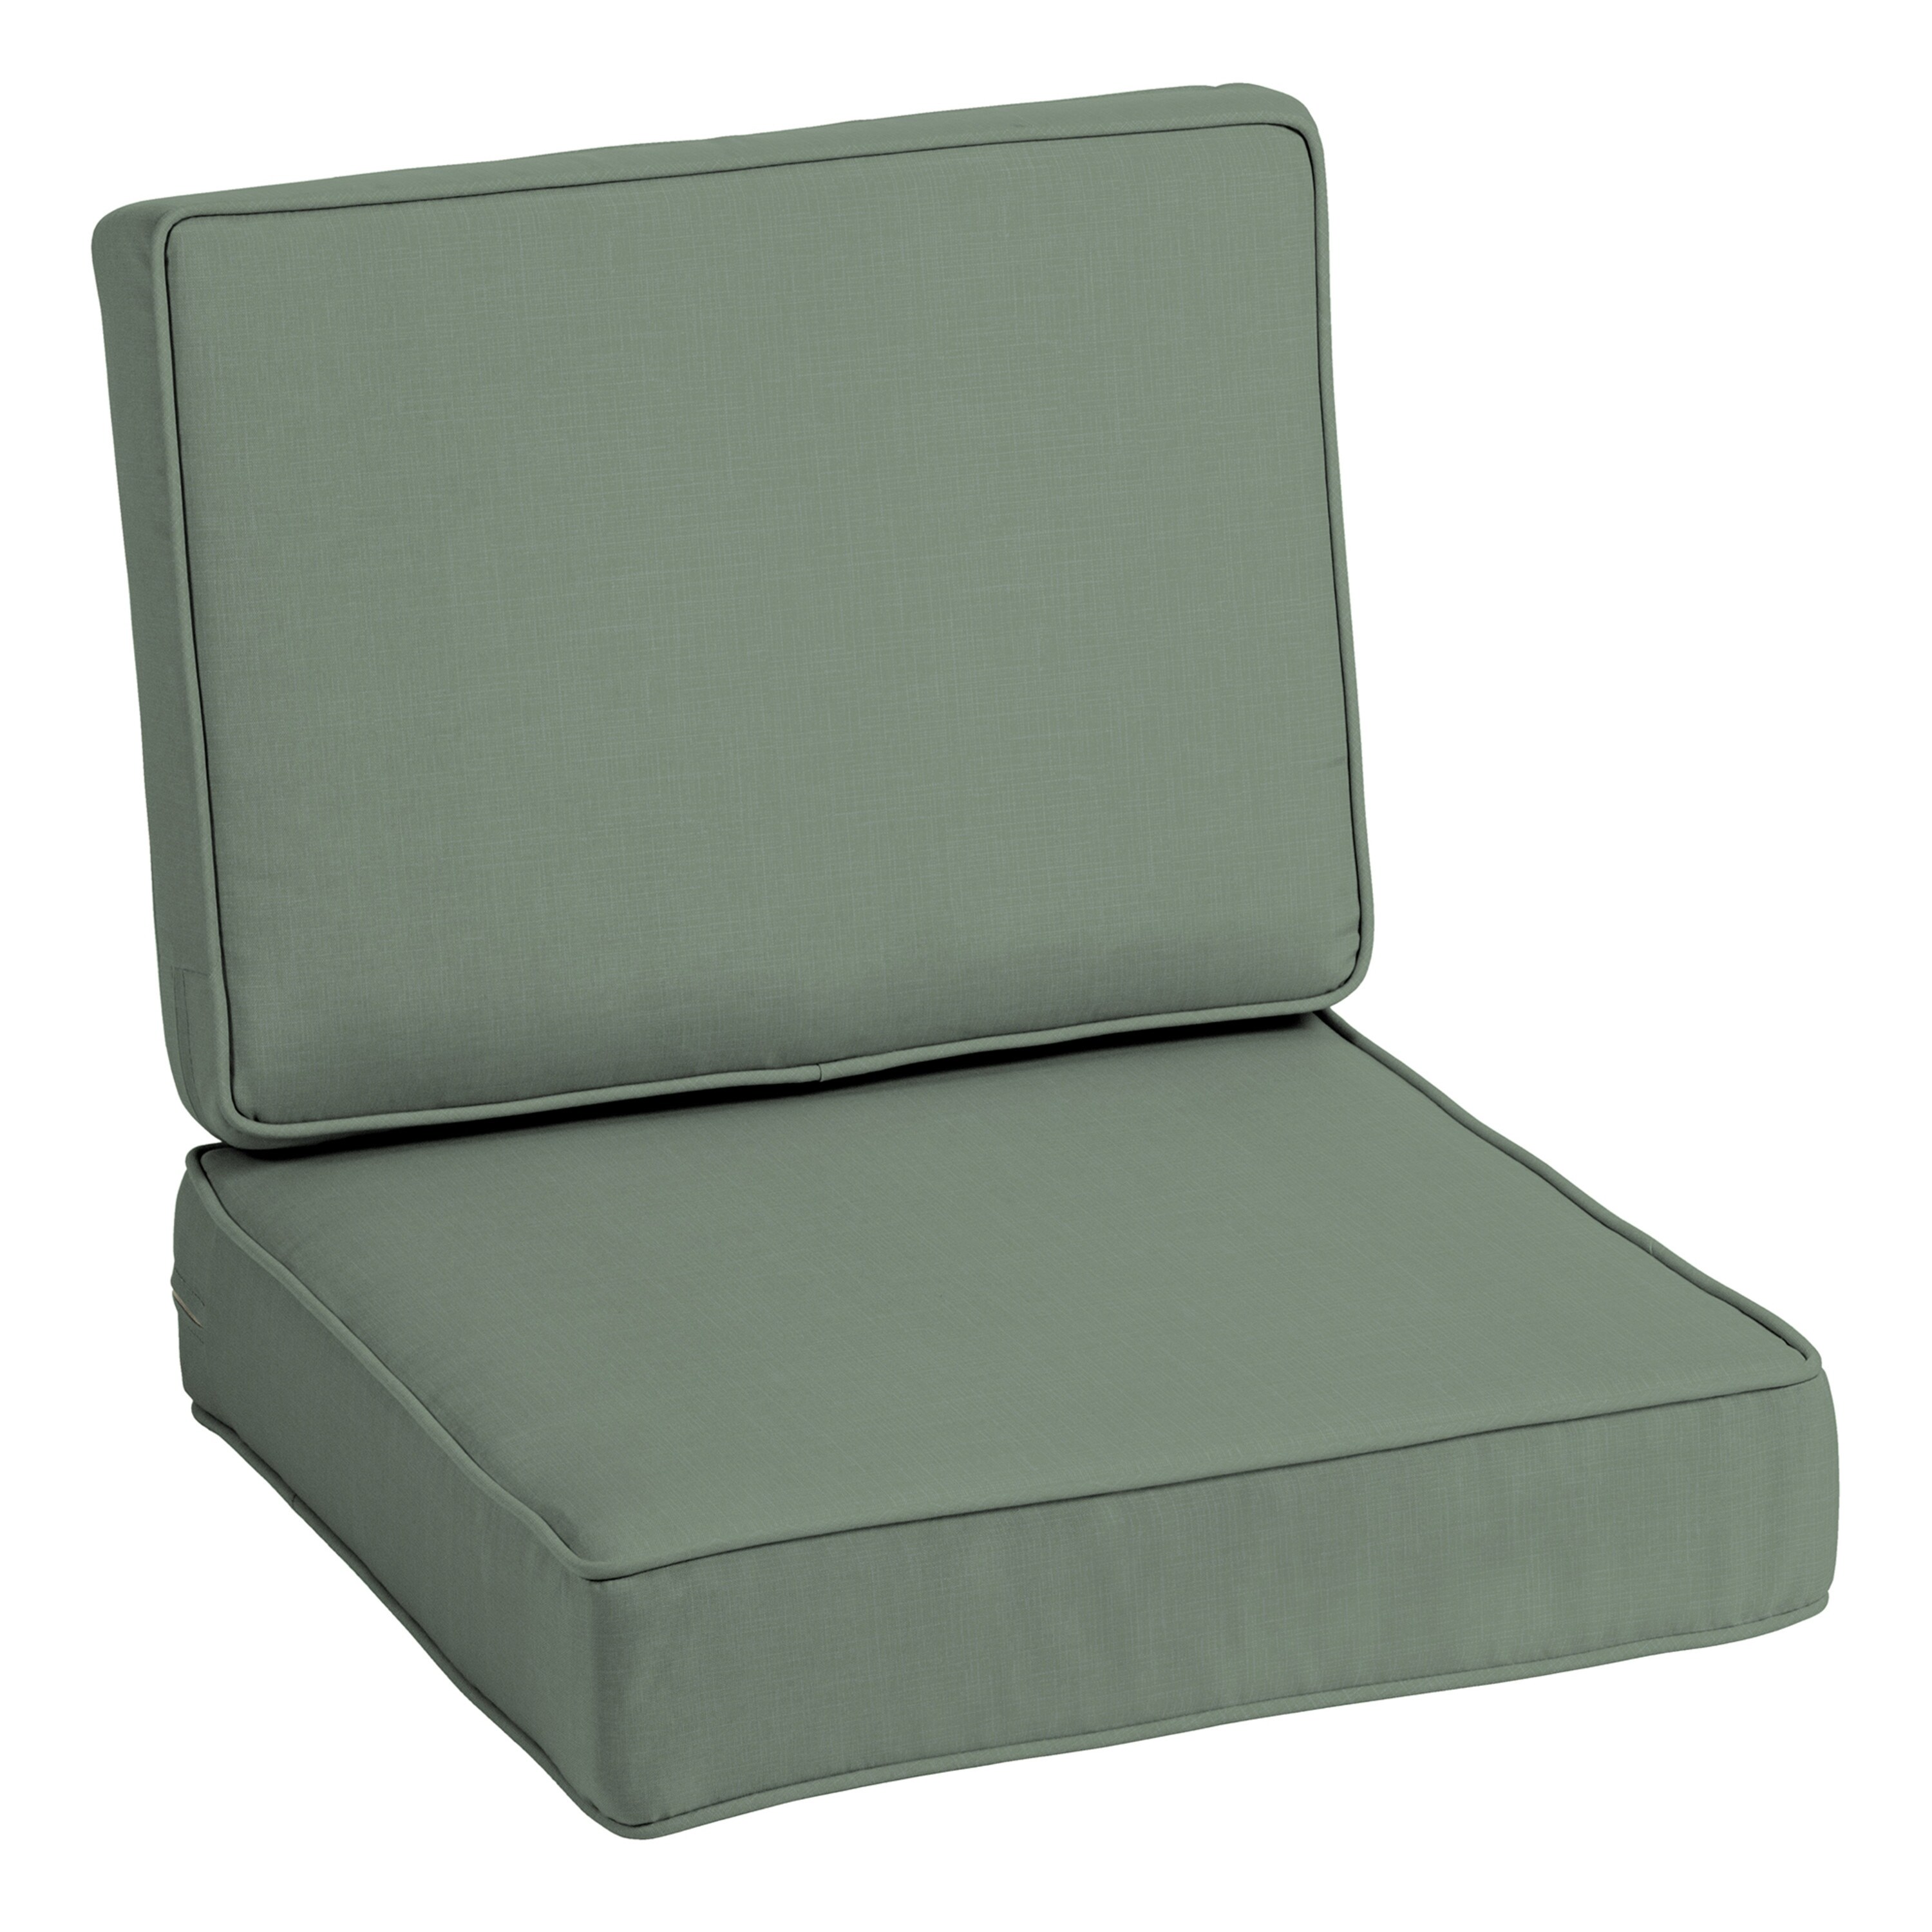 https://ak1.ostkcdn.com/images/products/is/images/direct/ef373c146cb4a8b2d7a8ed388e447a61061d0a41/Arden-Selections-ProFoam-Essentials-Outdoor-Firm-Deep-Seating-Cushion-Set-24-x-24.jpg